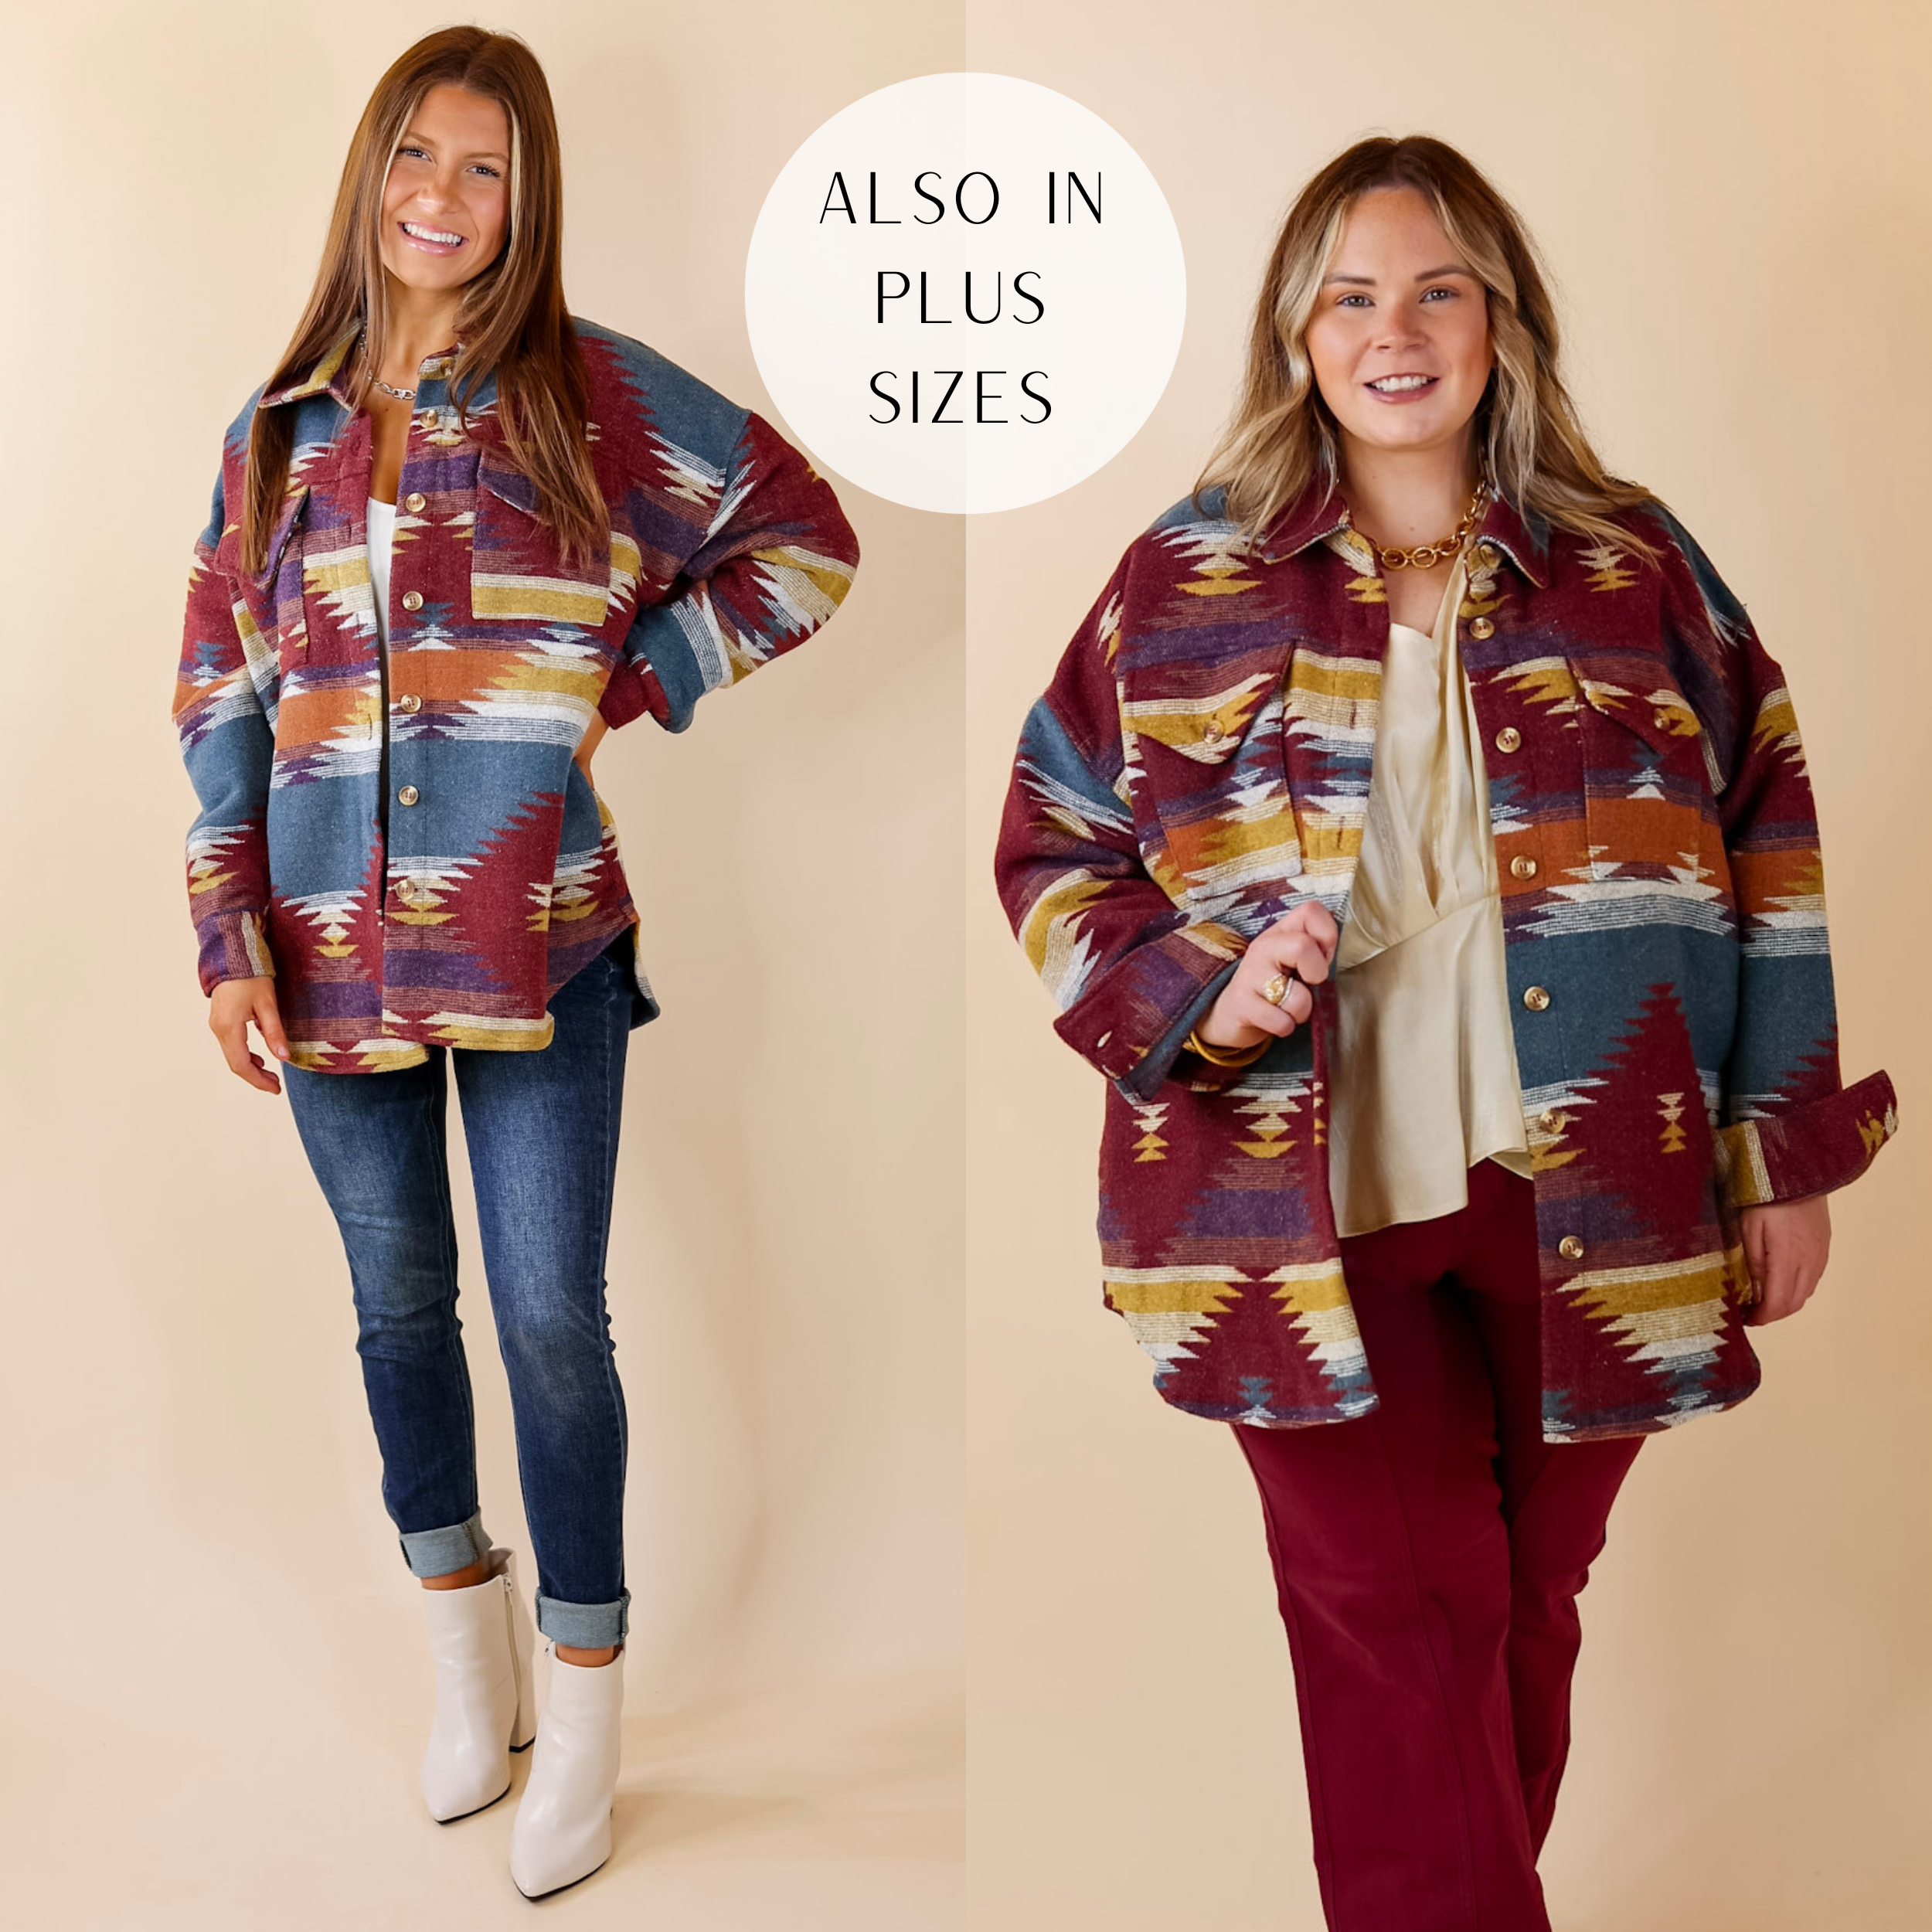 Model is wearing a blue and maroon mix aztec print jacket that has long sleeves, a collar, and buttons up. Model has paired the jacket with a cream colored top, maroon pants, white booties, and gold tone jewelry.